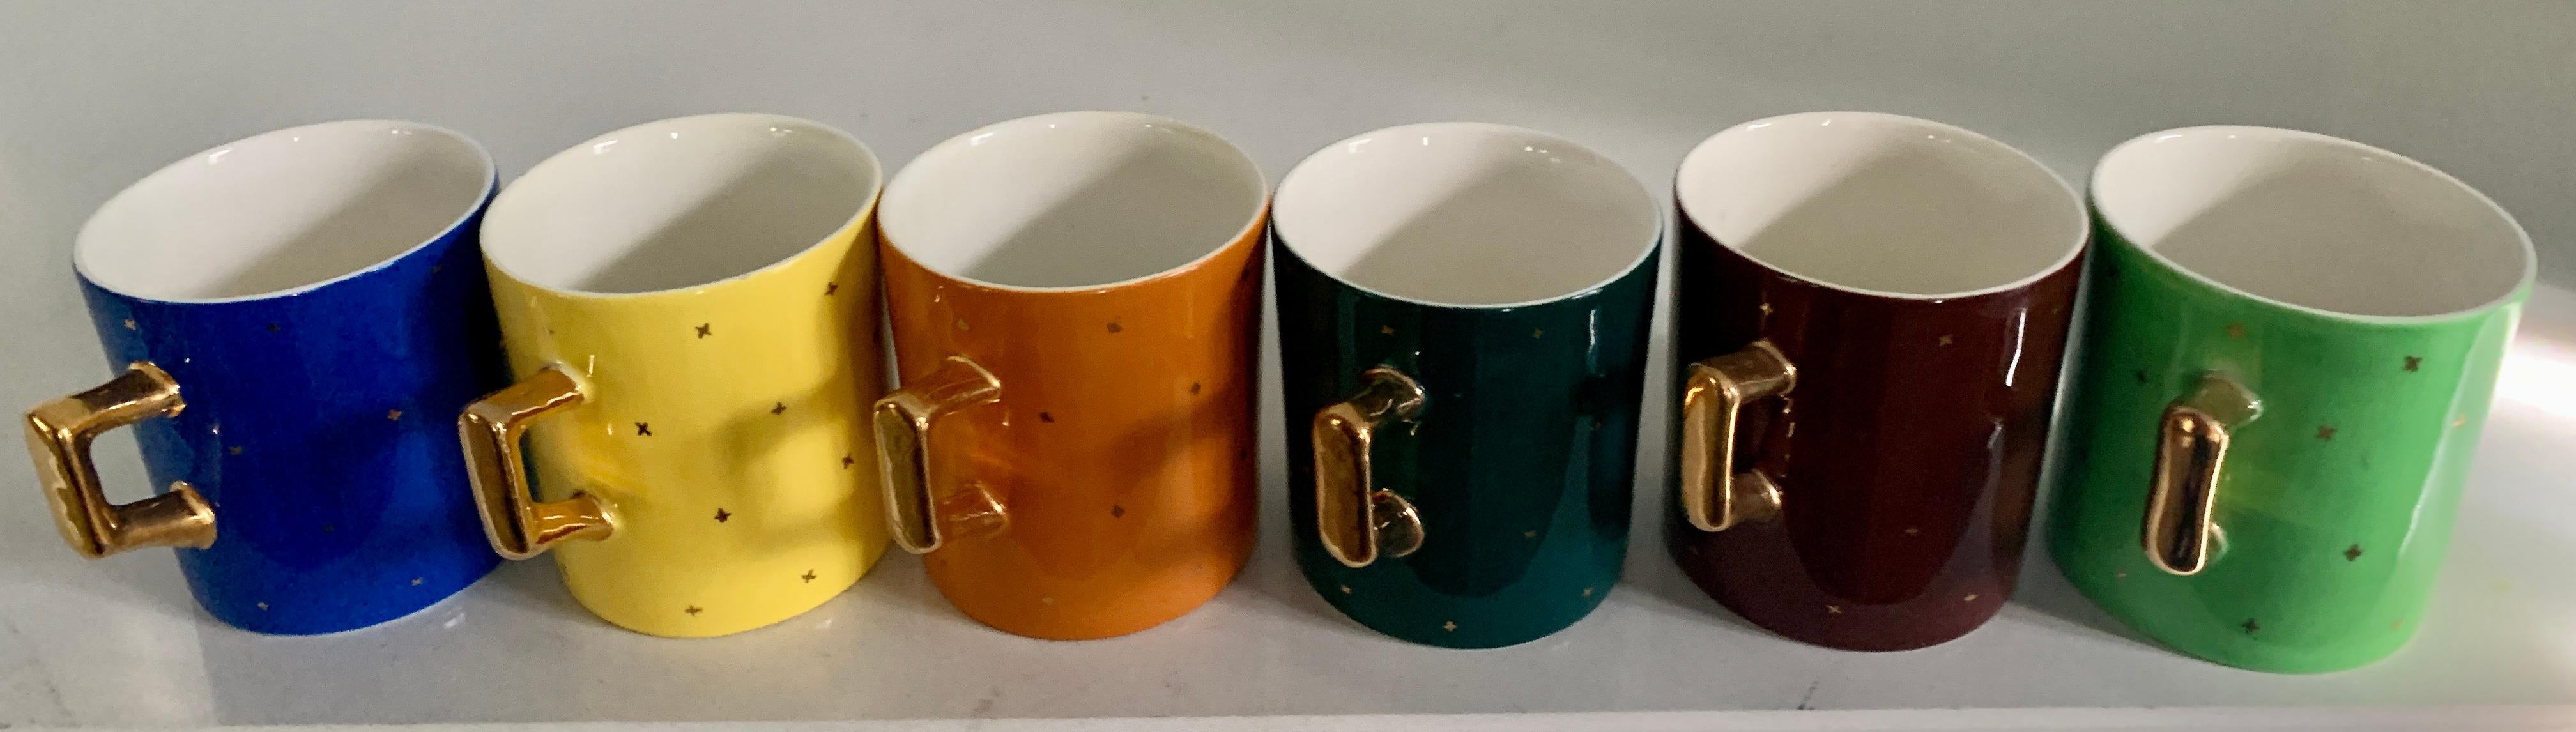 Hand-Painted Set of 6 Italian Porcelain Muti Color Espresso Cups with Stars For Sale